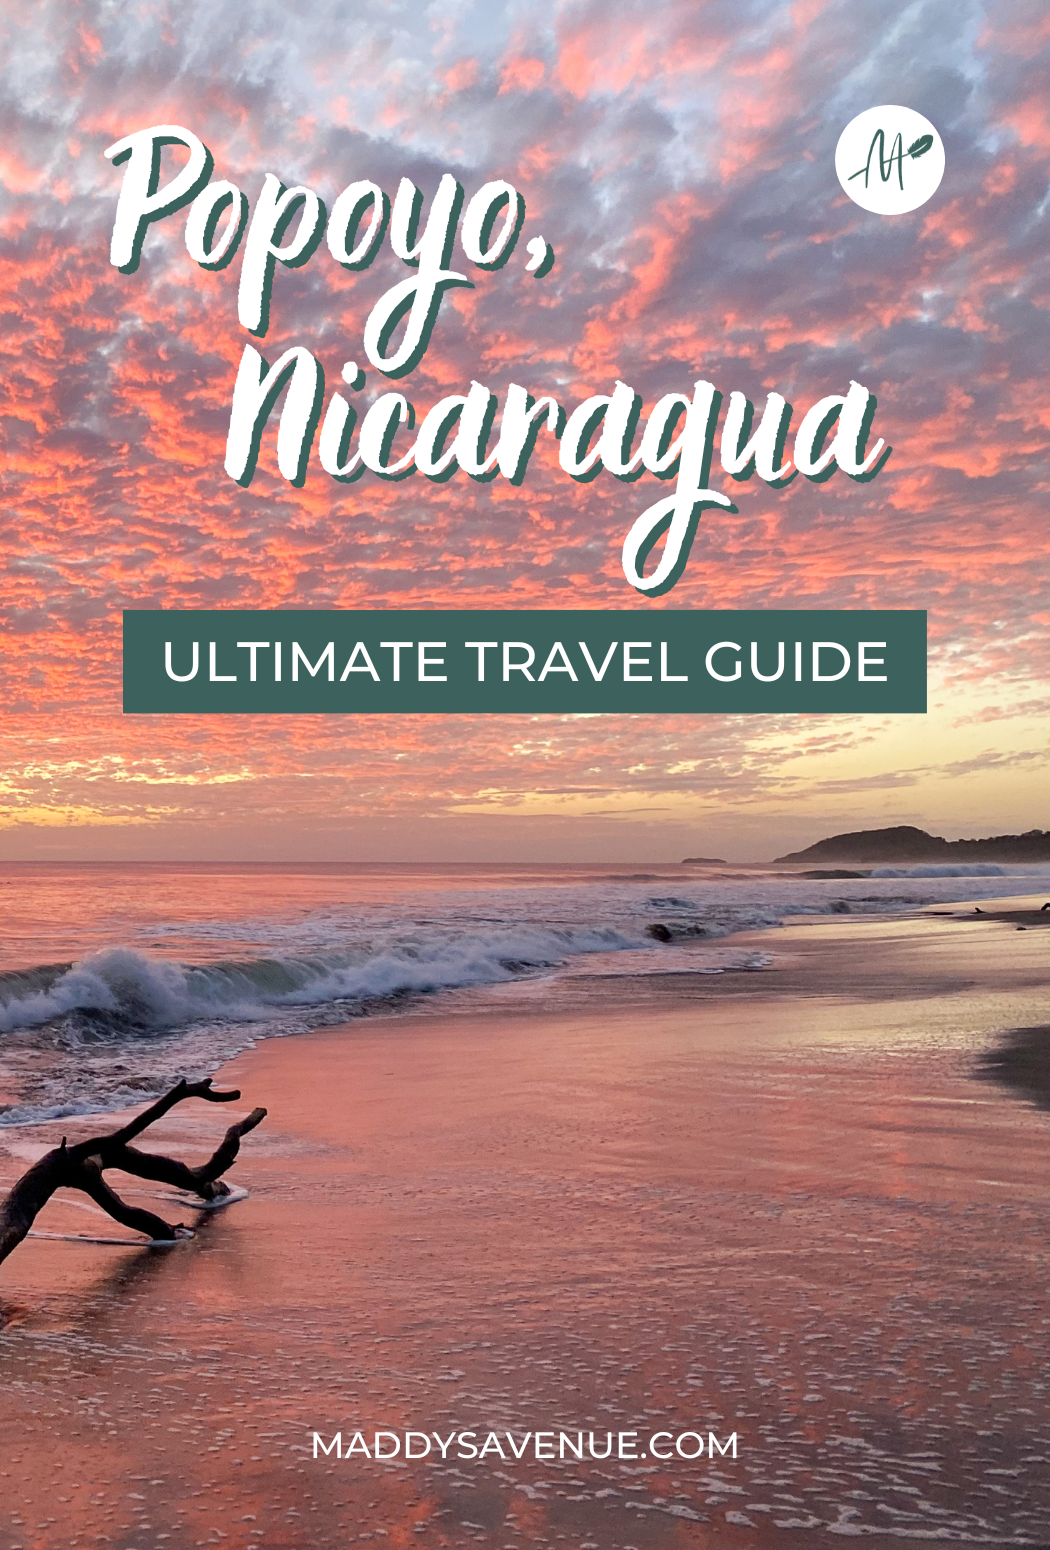 With an alluring spirit of the “Wild Wild West,” a swirl of local and indigenous peoples, and a collection of surf fanatics and yogi expats, there’s something so special about Popoyo. After living in Popoyo home for 9 months, I created this expert Popoyo travel guide just for you. From the best things to do in Popoyo and the best restaurants, to where to stay, how to get to Popoyo, and other must-know tips -  consider this your roadmap to the best adventures around Popoyo, Nicaragua!